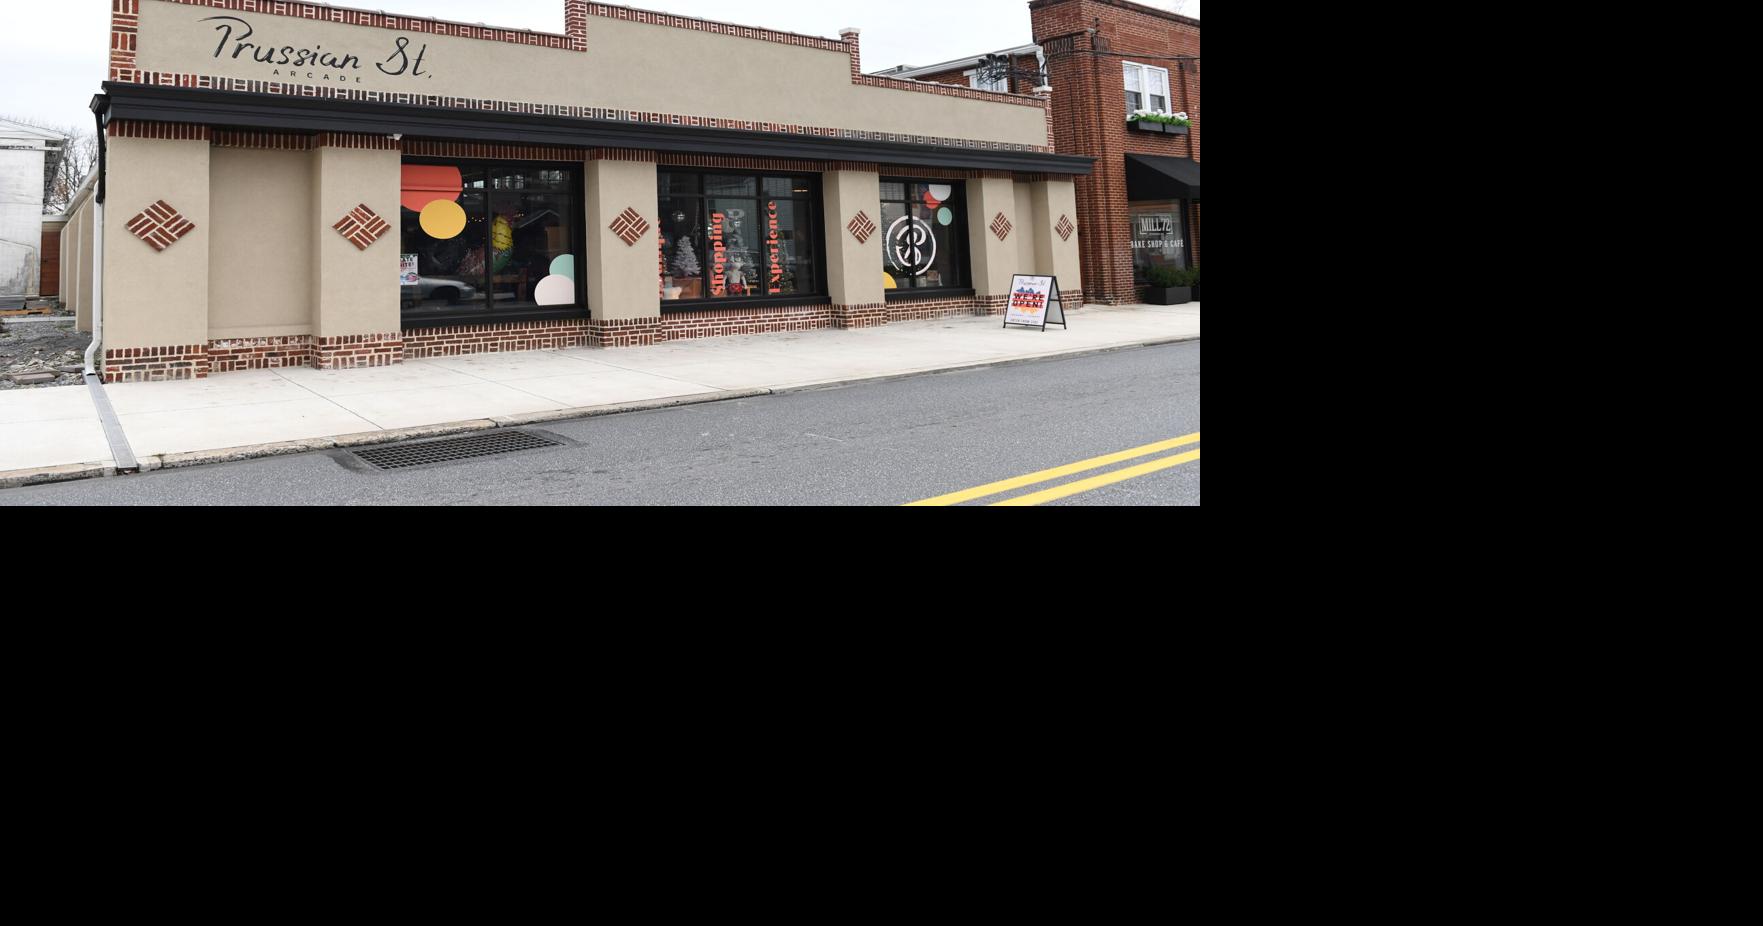 Manheim-based Prussian Street Arcade to expand with new vendor marketplace in East Hempfield Twp.